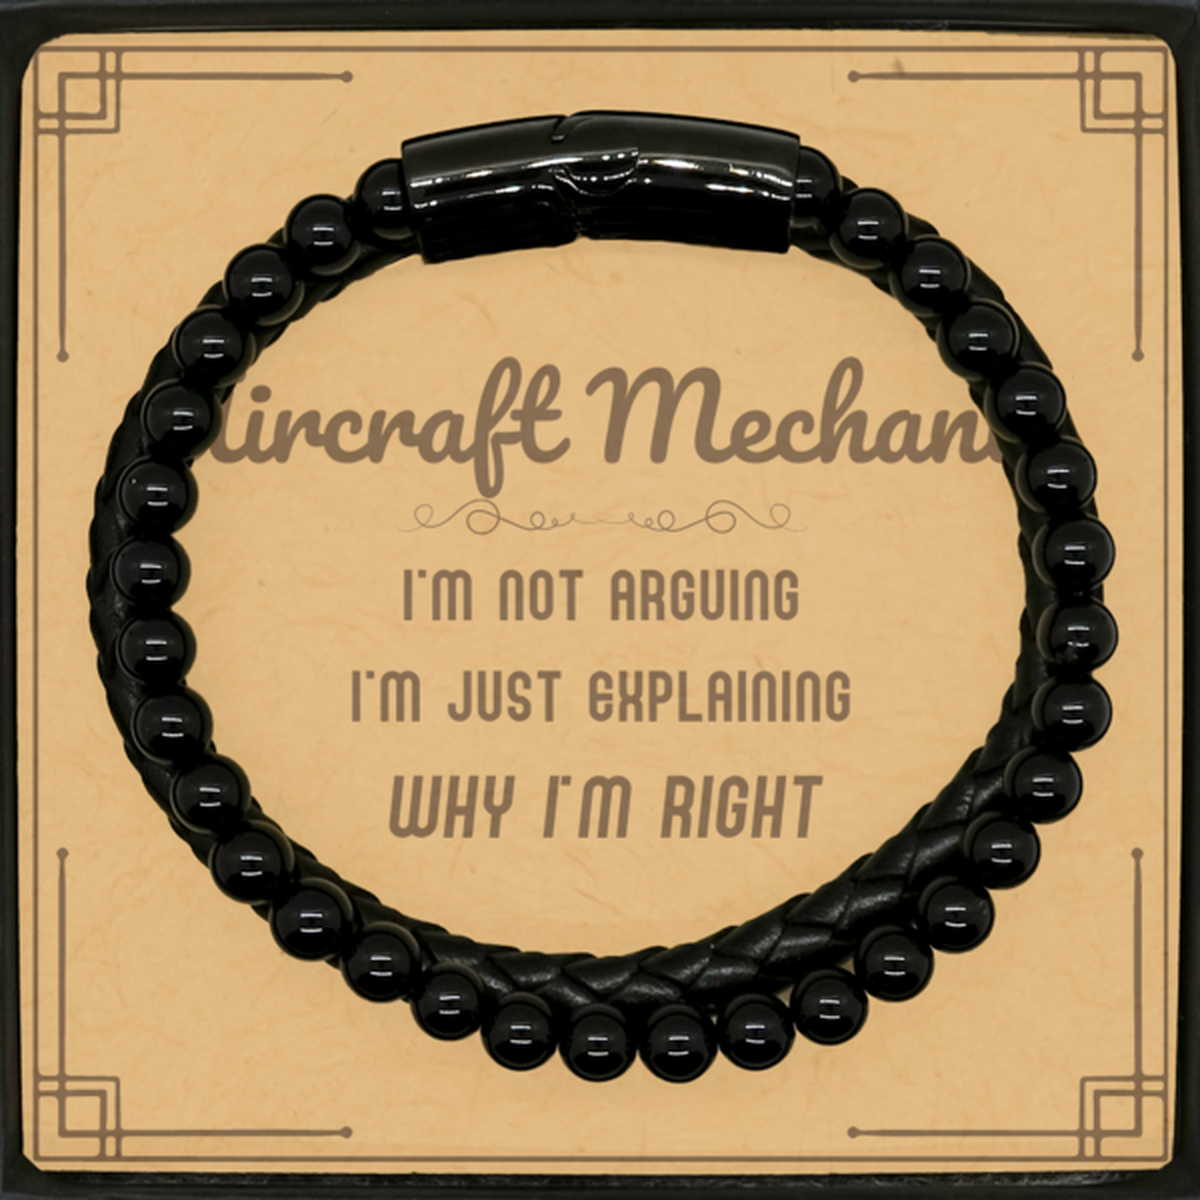 Aircraft Mechanic I'm not Arguing. I'm Just Explaining Why I'm RIGHT Stone Leather Bracelets, Funny Saying Quote Aircraft Mechanic Gifts For Aircraft Mechanic Message Card Graduation Birthday Christmas Gifts for Men Women Coworker